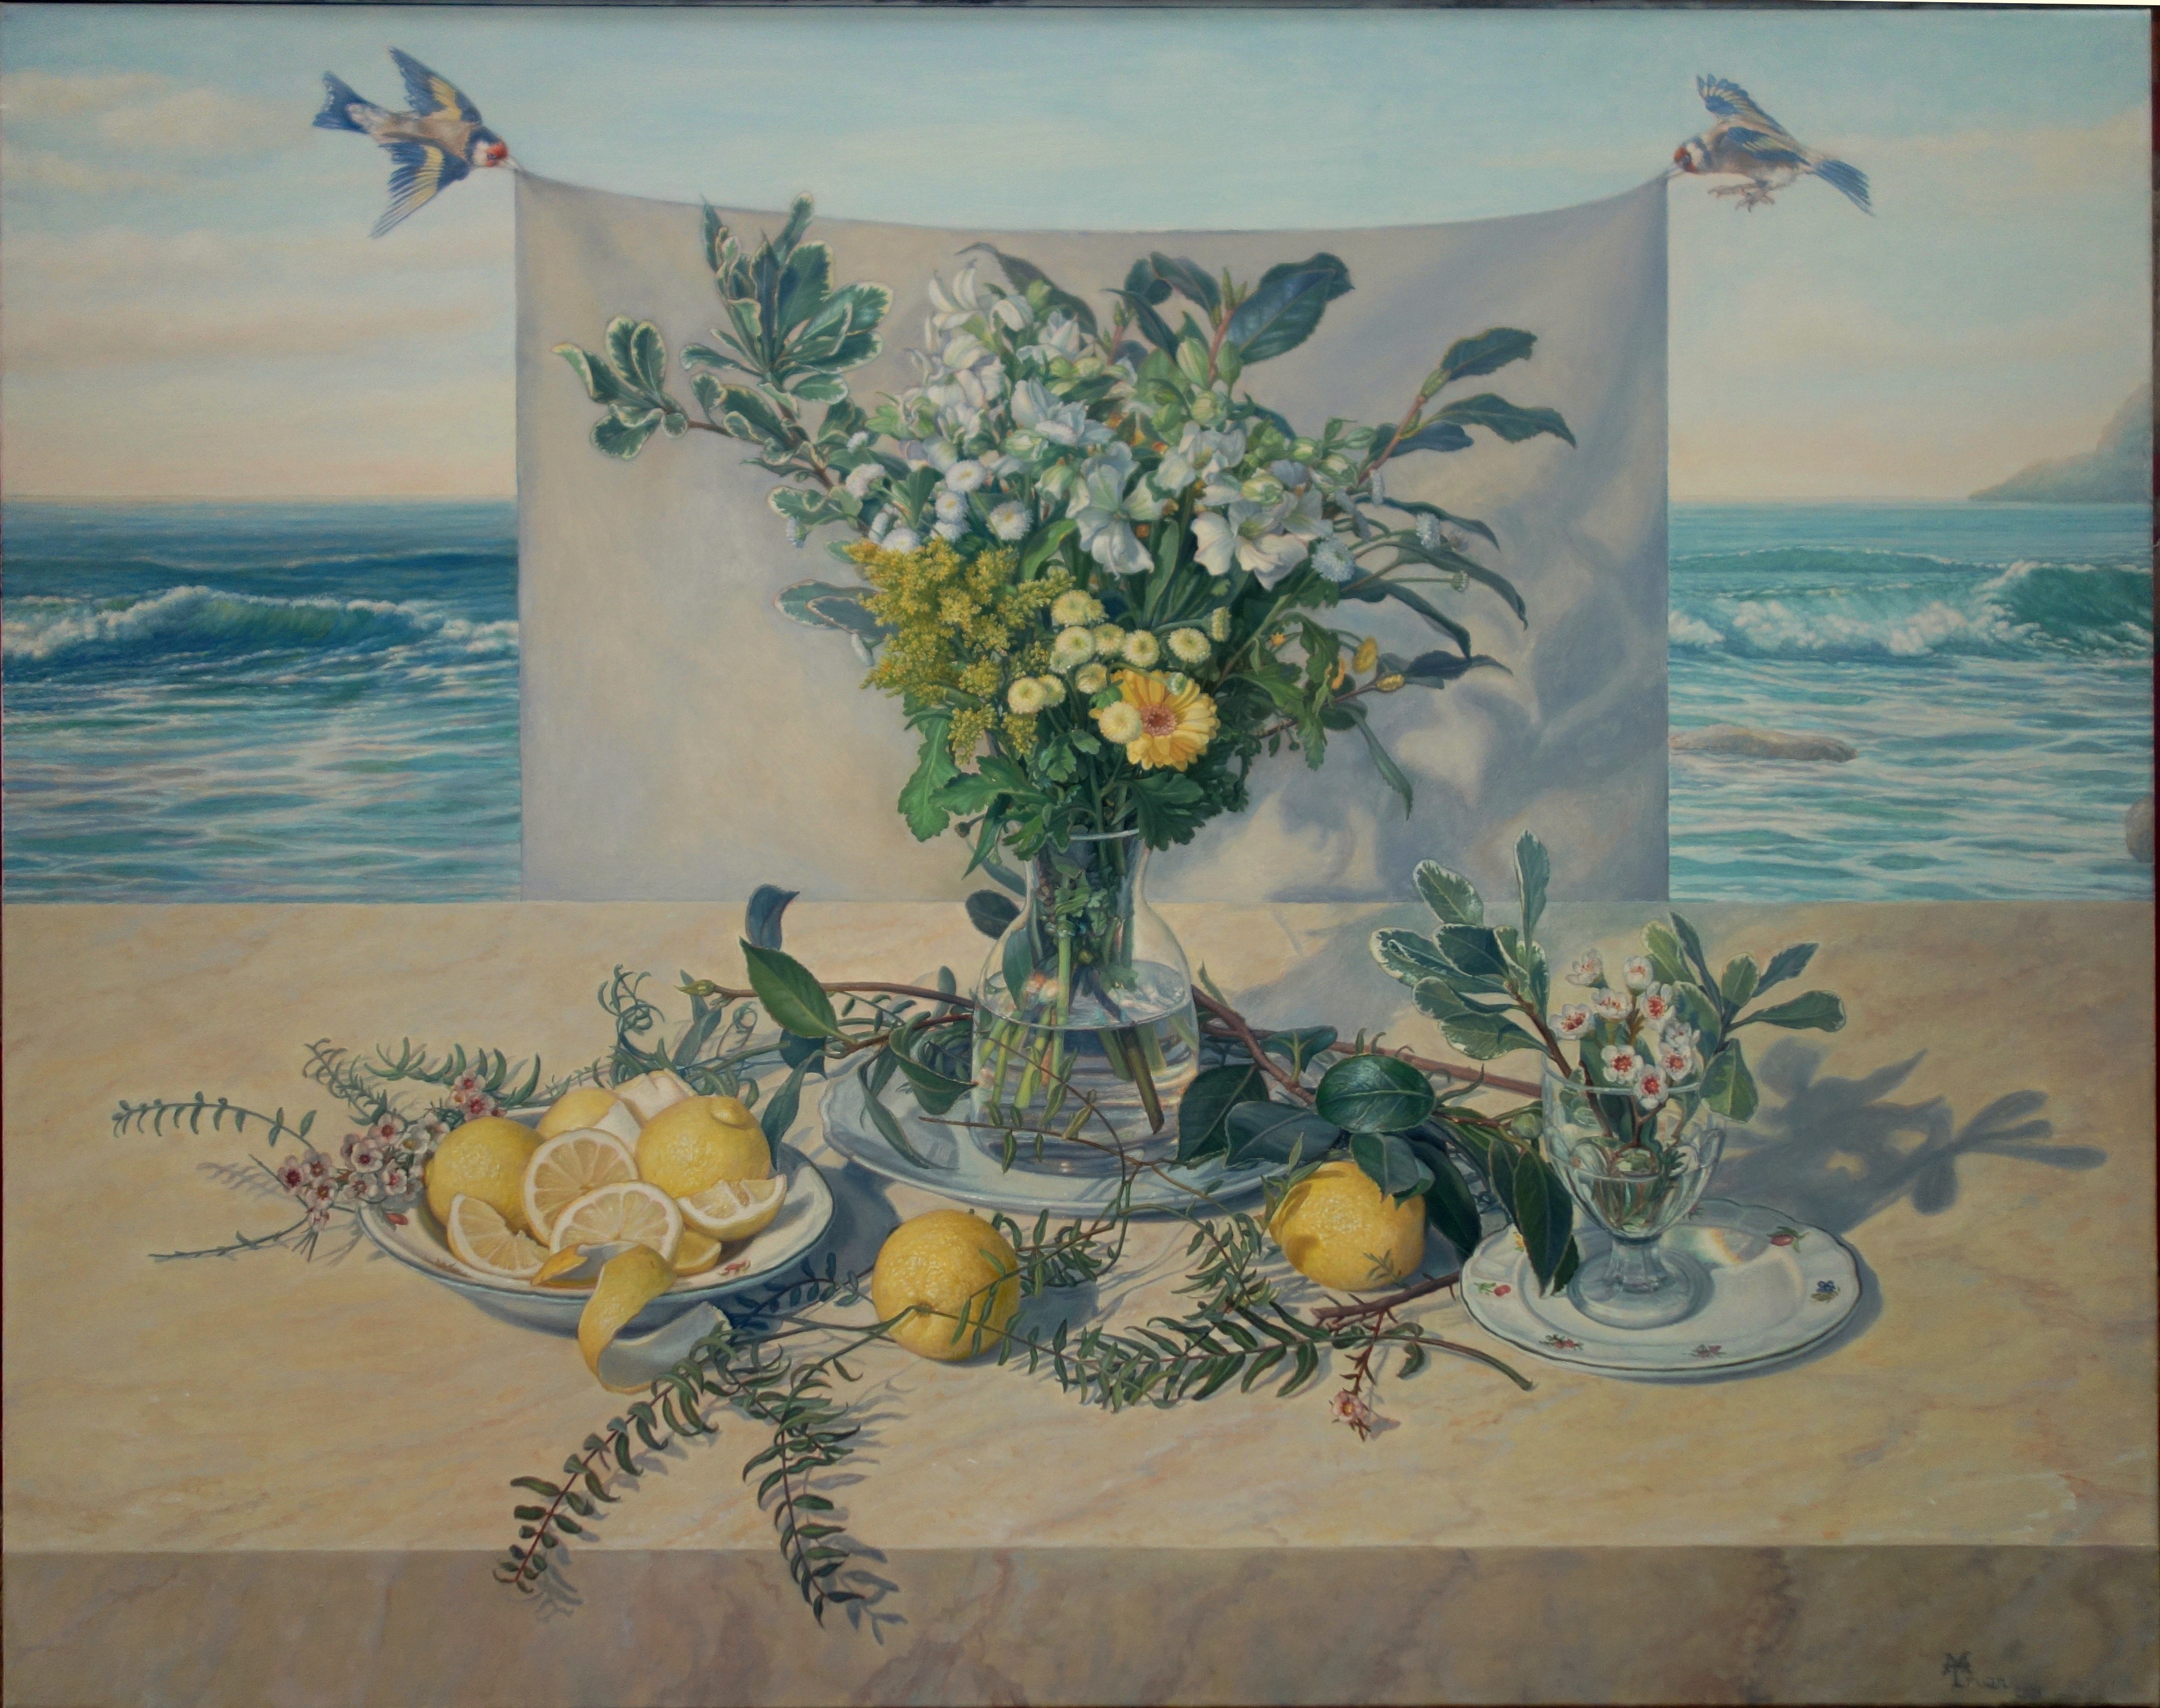 Flowers and lemons with goldfinches on the beach, 2021 | oil on canvas, 28.7x36.2in.